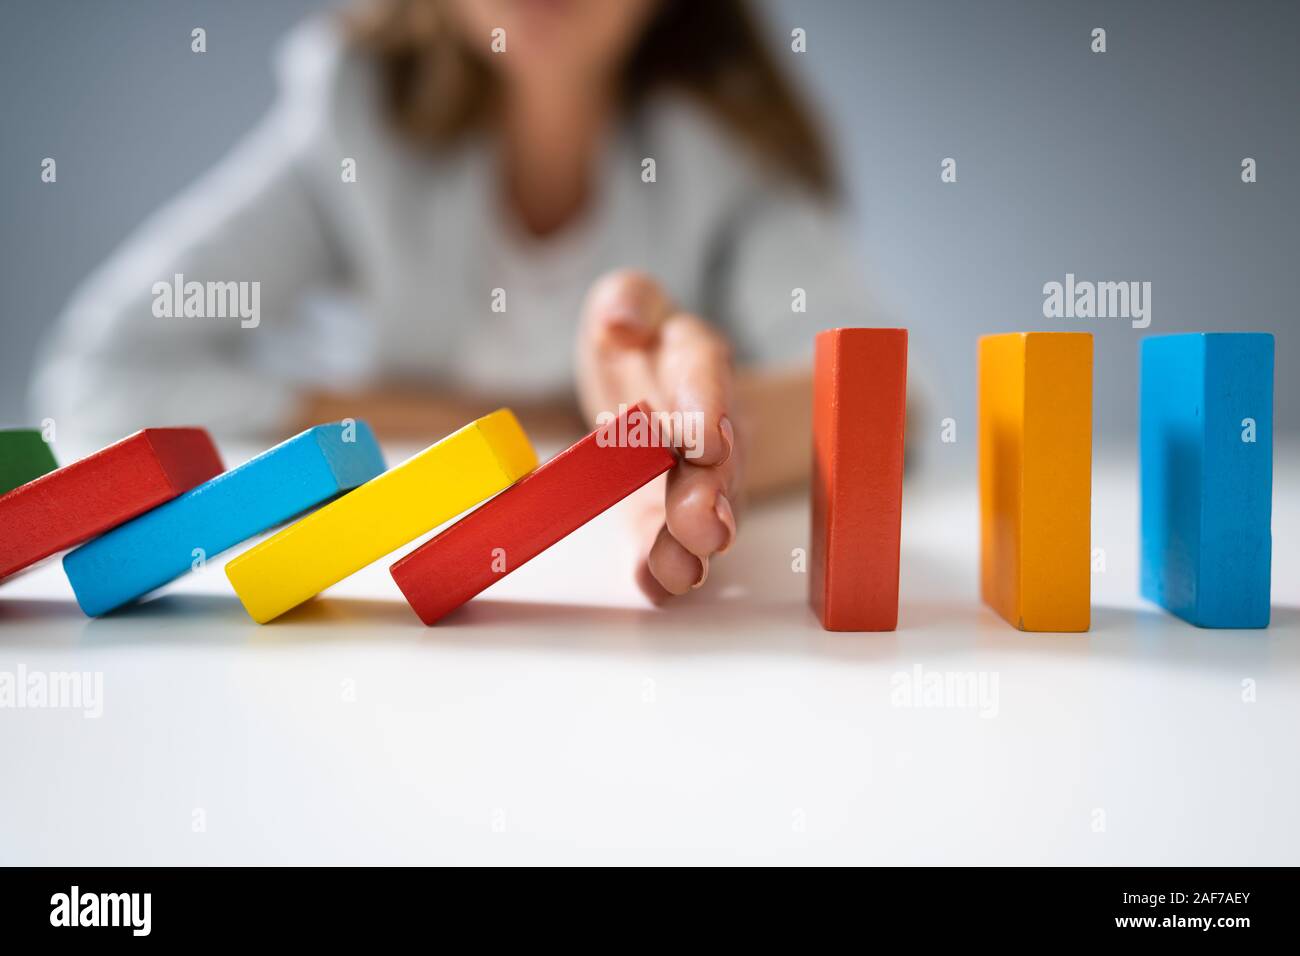 High Angle View Of A Businessperson Stopping Colorful Dominoes From Falling On Desk Stock Photo